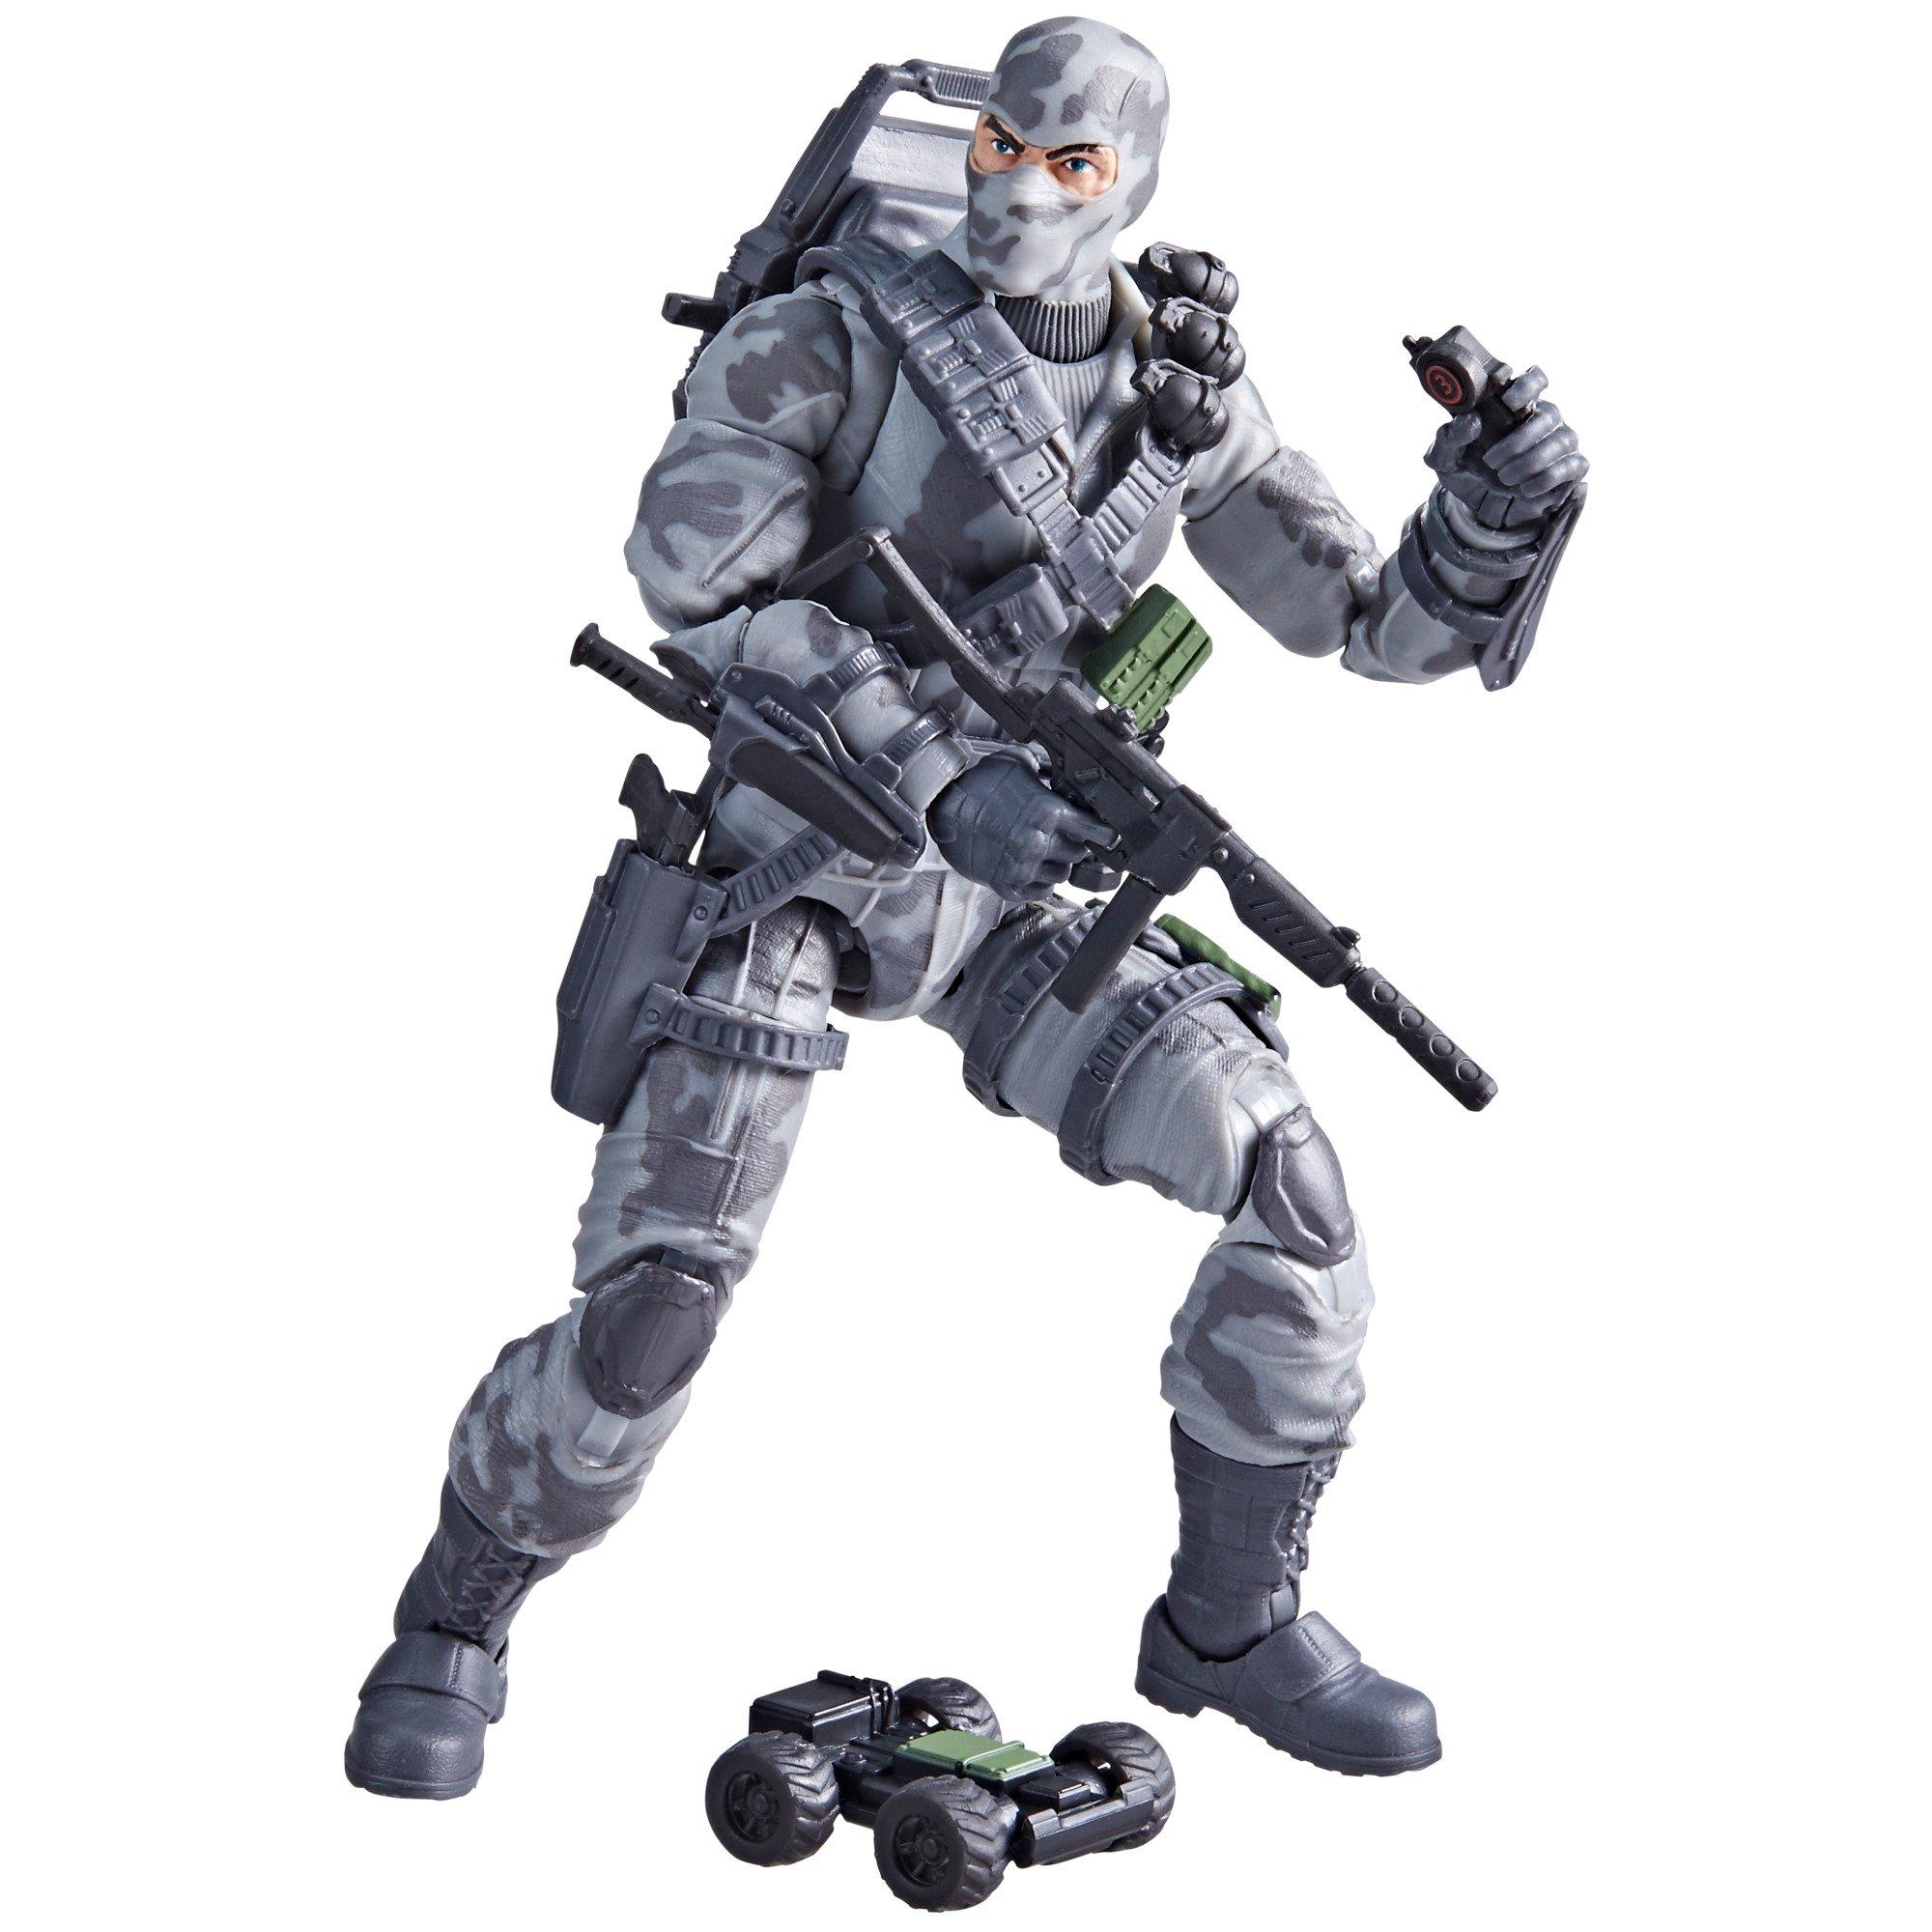 Shop GI Joe Collectibles from We-R-Toys